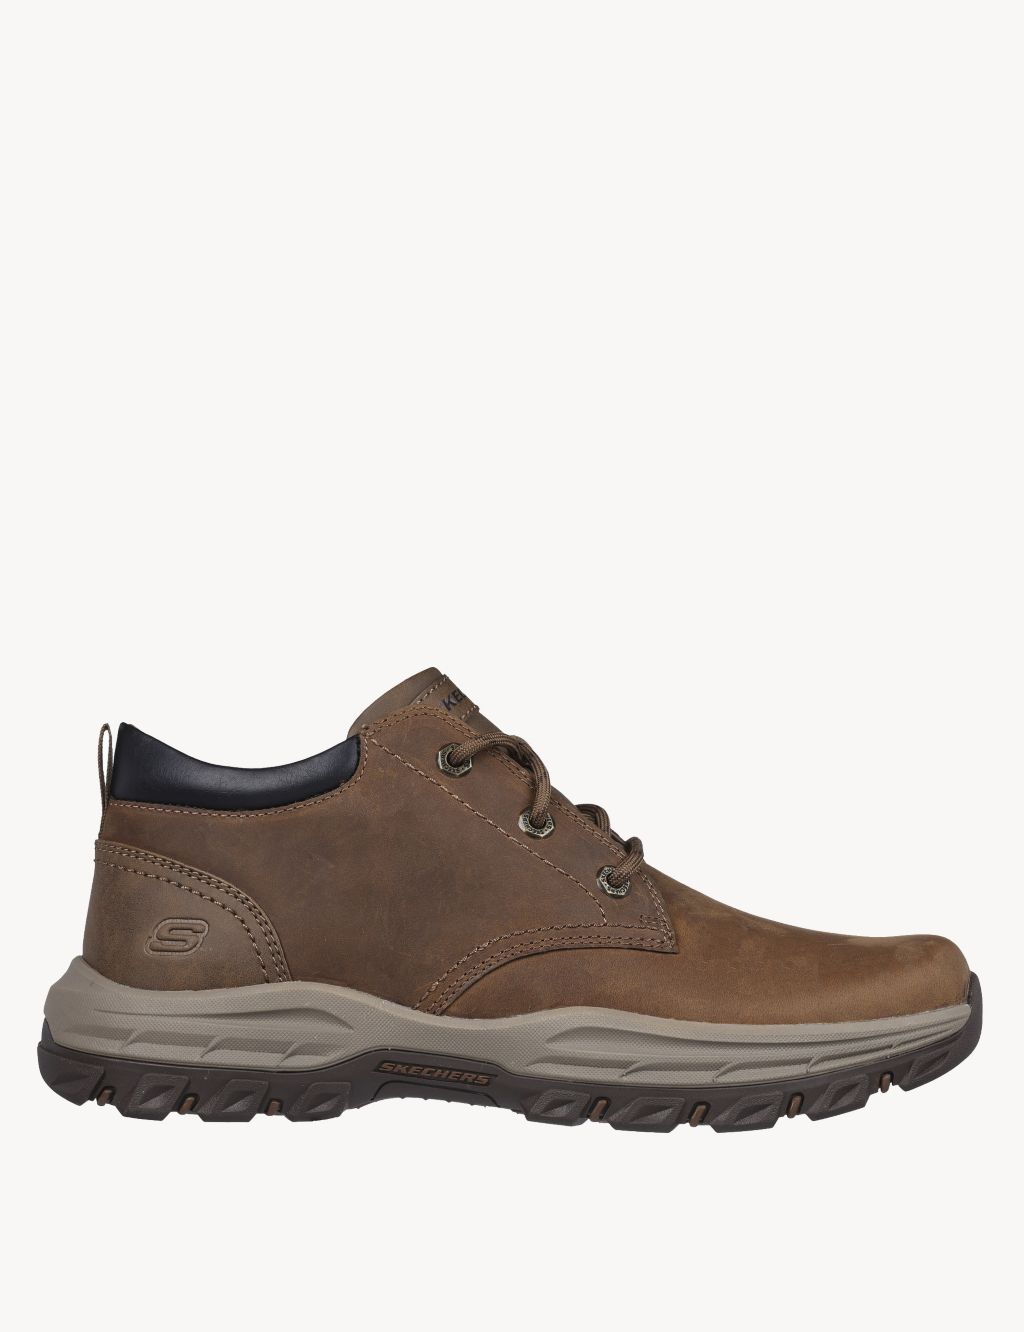 Relaxed Fit™ Knowlson Ramhurst Boots image 1